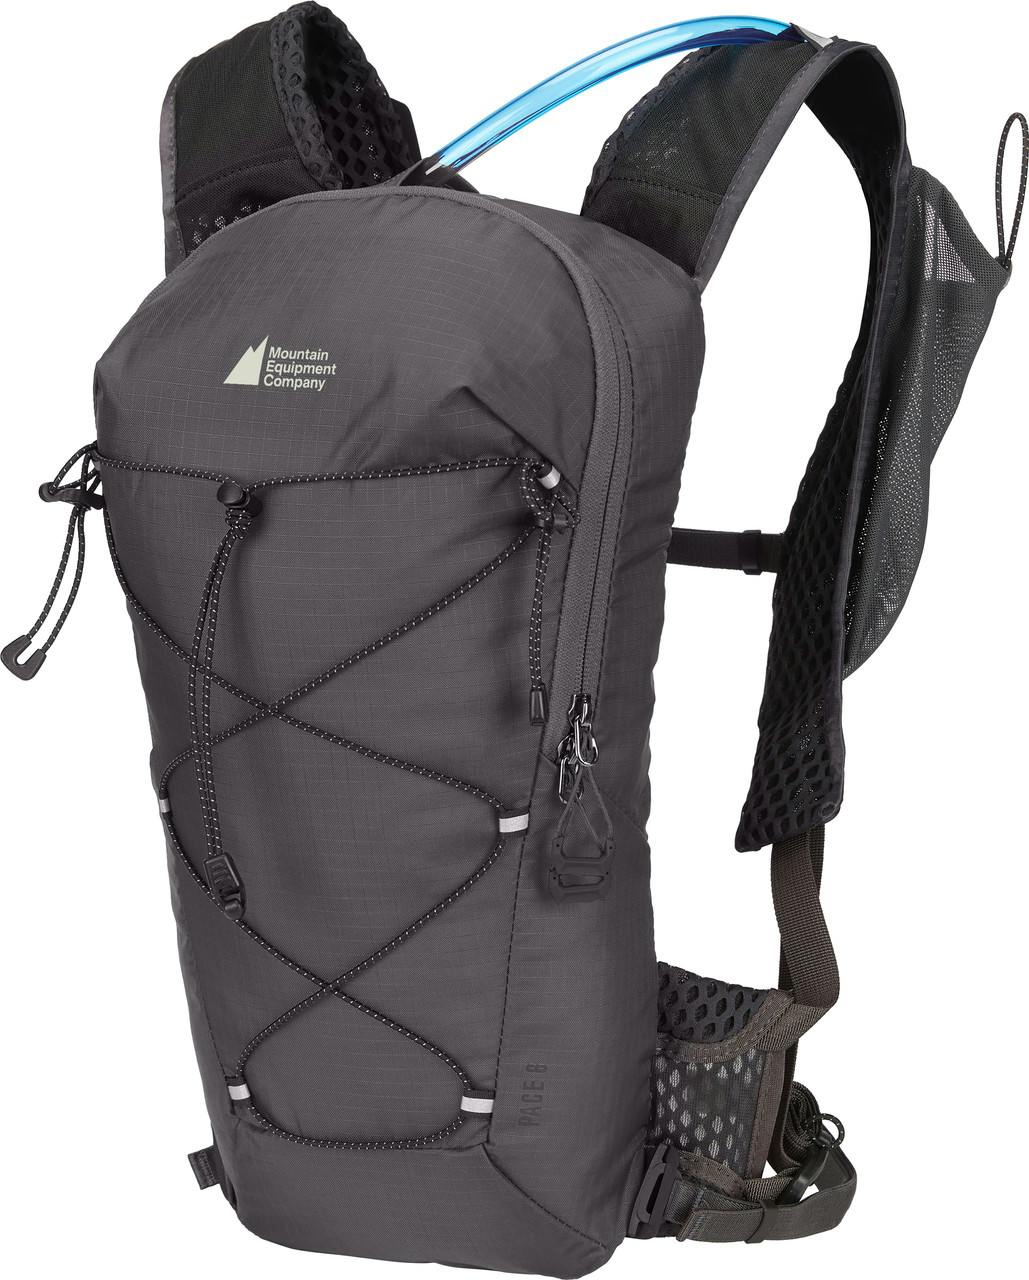 Pace 6 Hydration Pack Obsidian